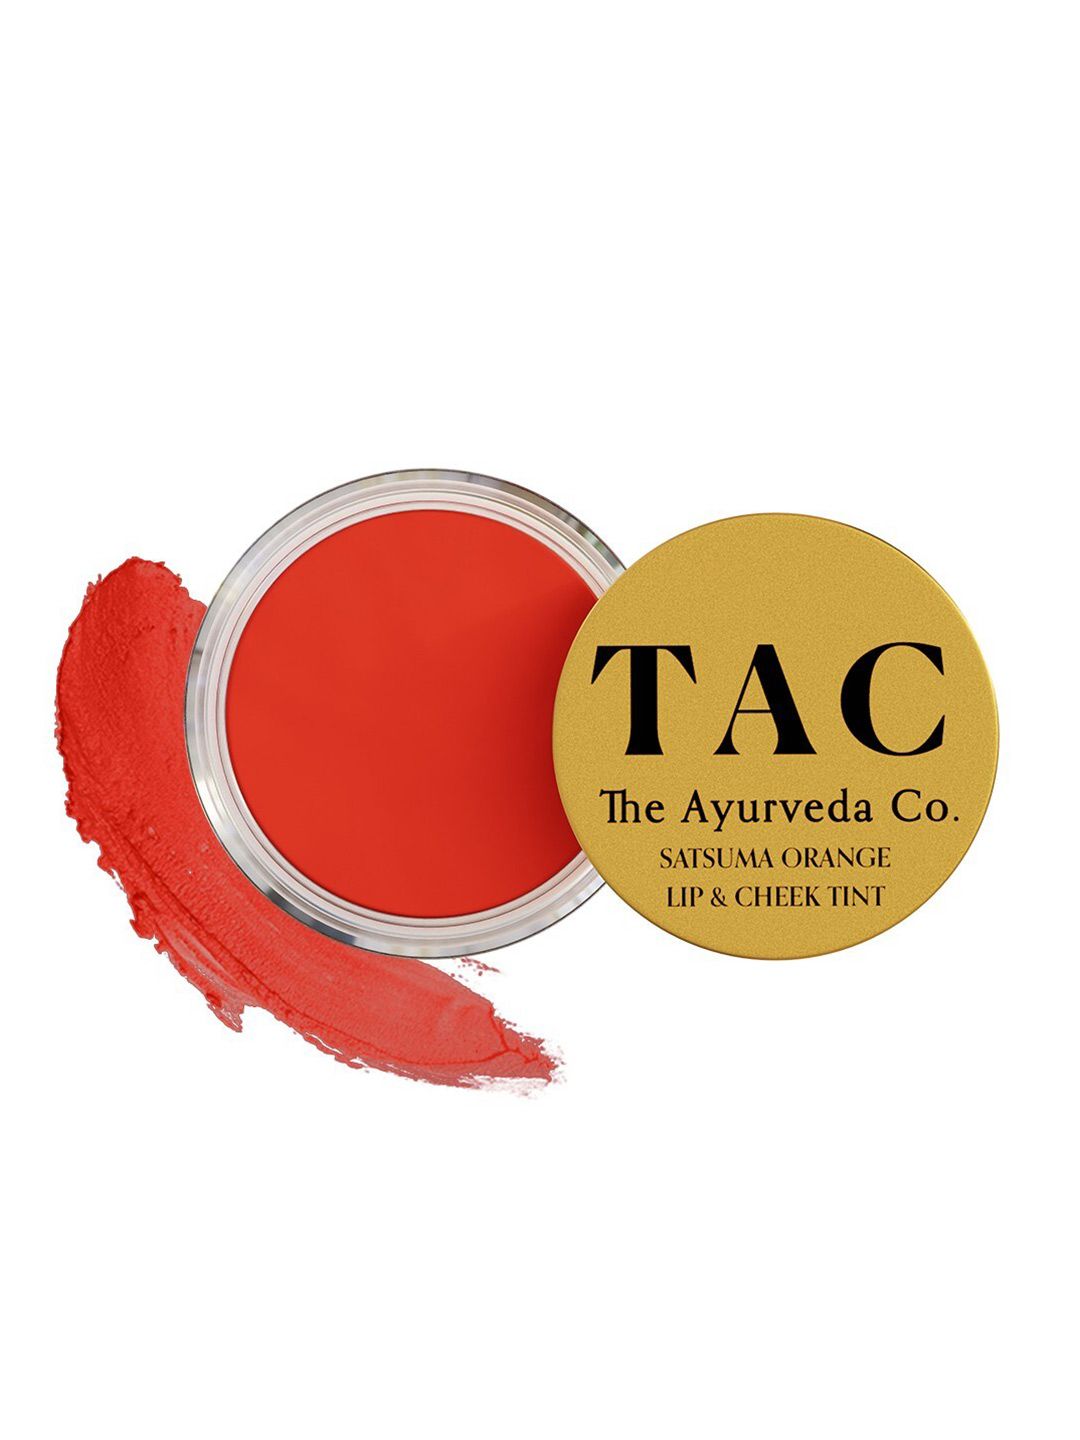 TAC - The Ayurveda Co. Unisex Satsuma Orange Lip & Cheek Tint With Shea Butter 5gm Price in India